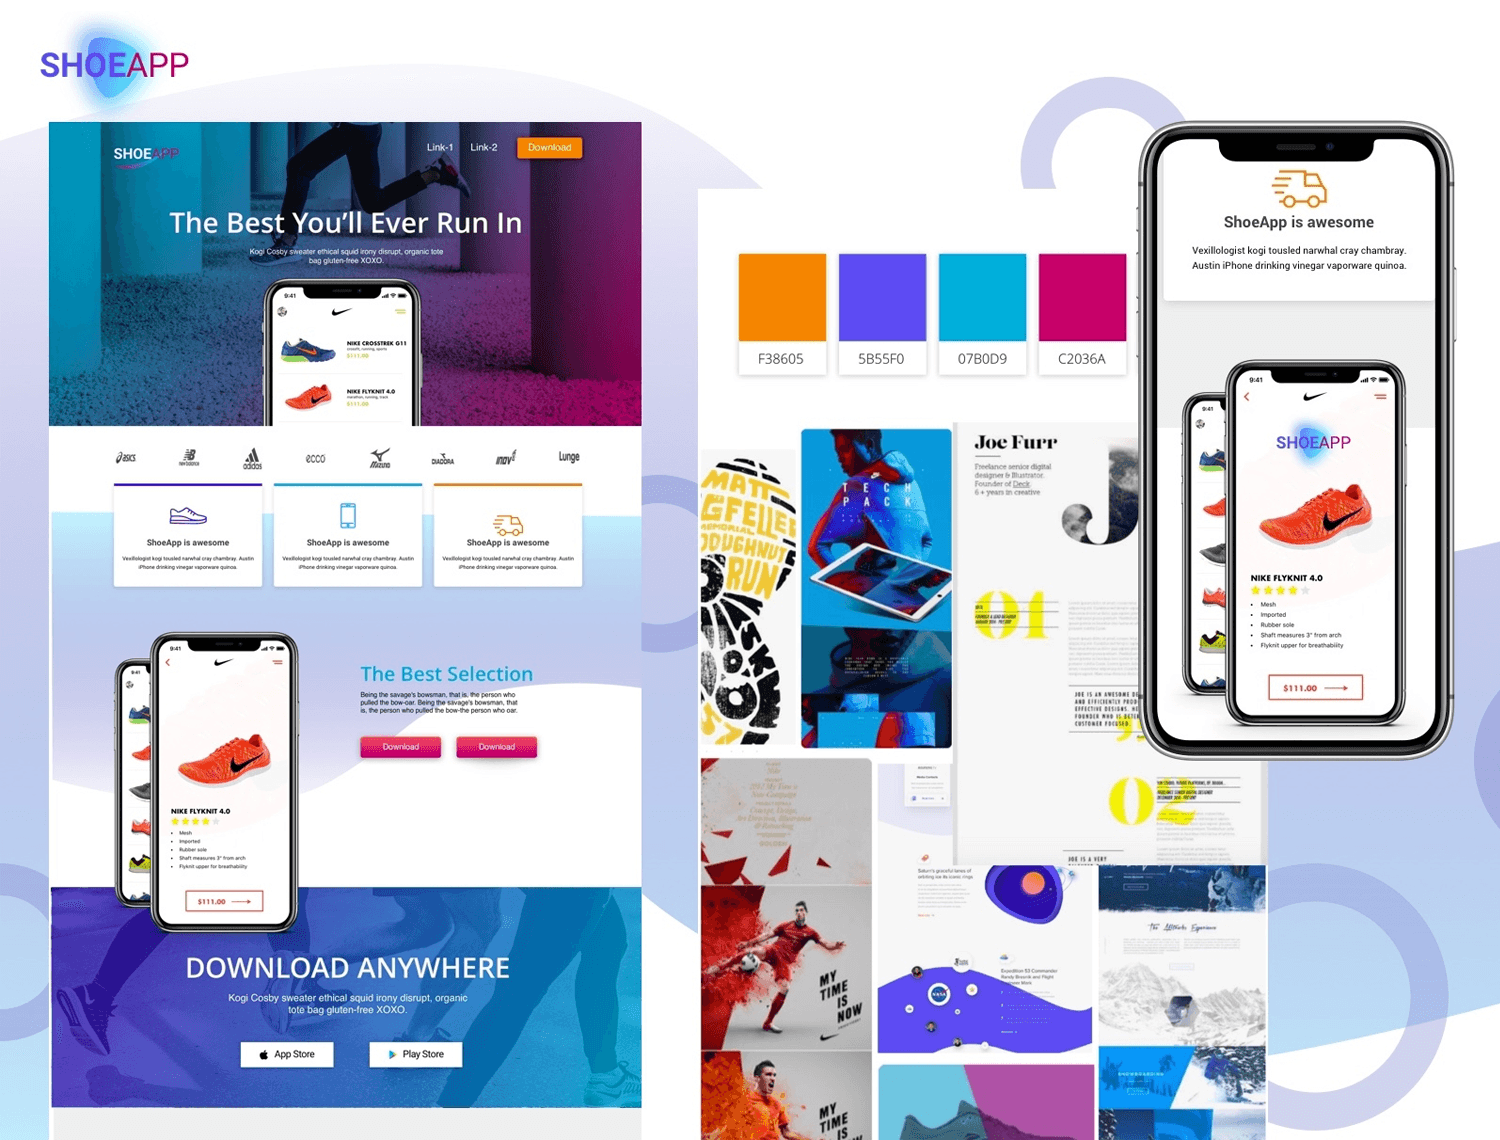 Website mood board examples - vibrant sports clothing app with bold colors